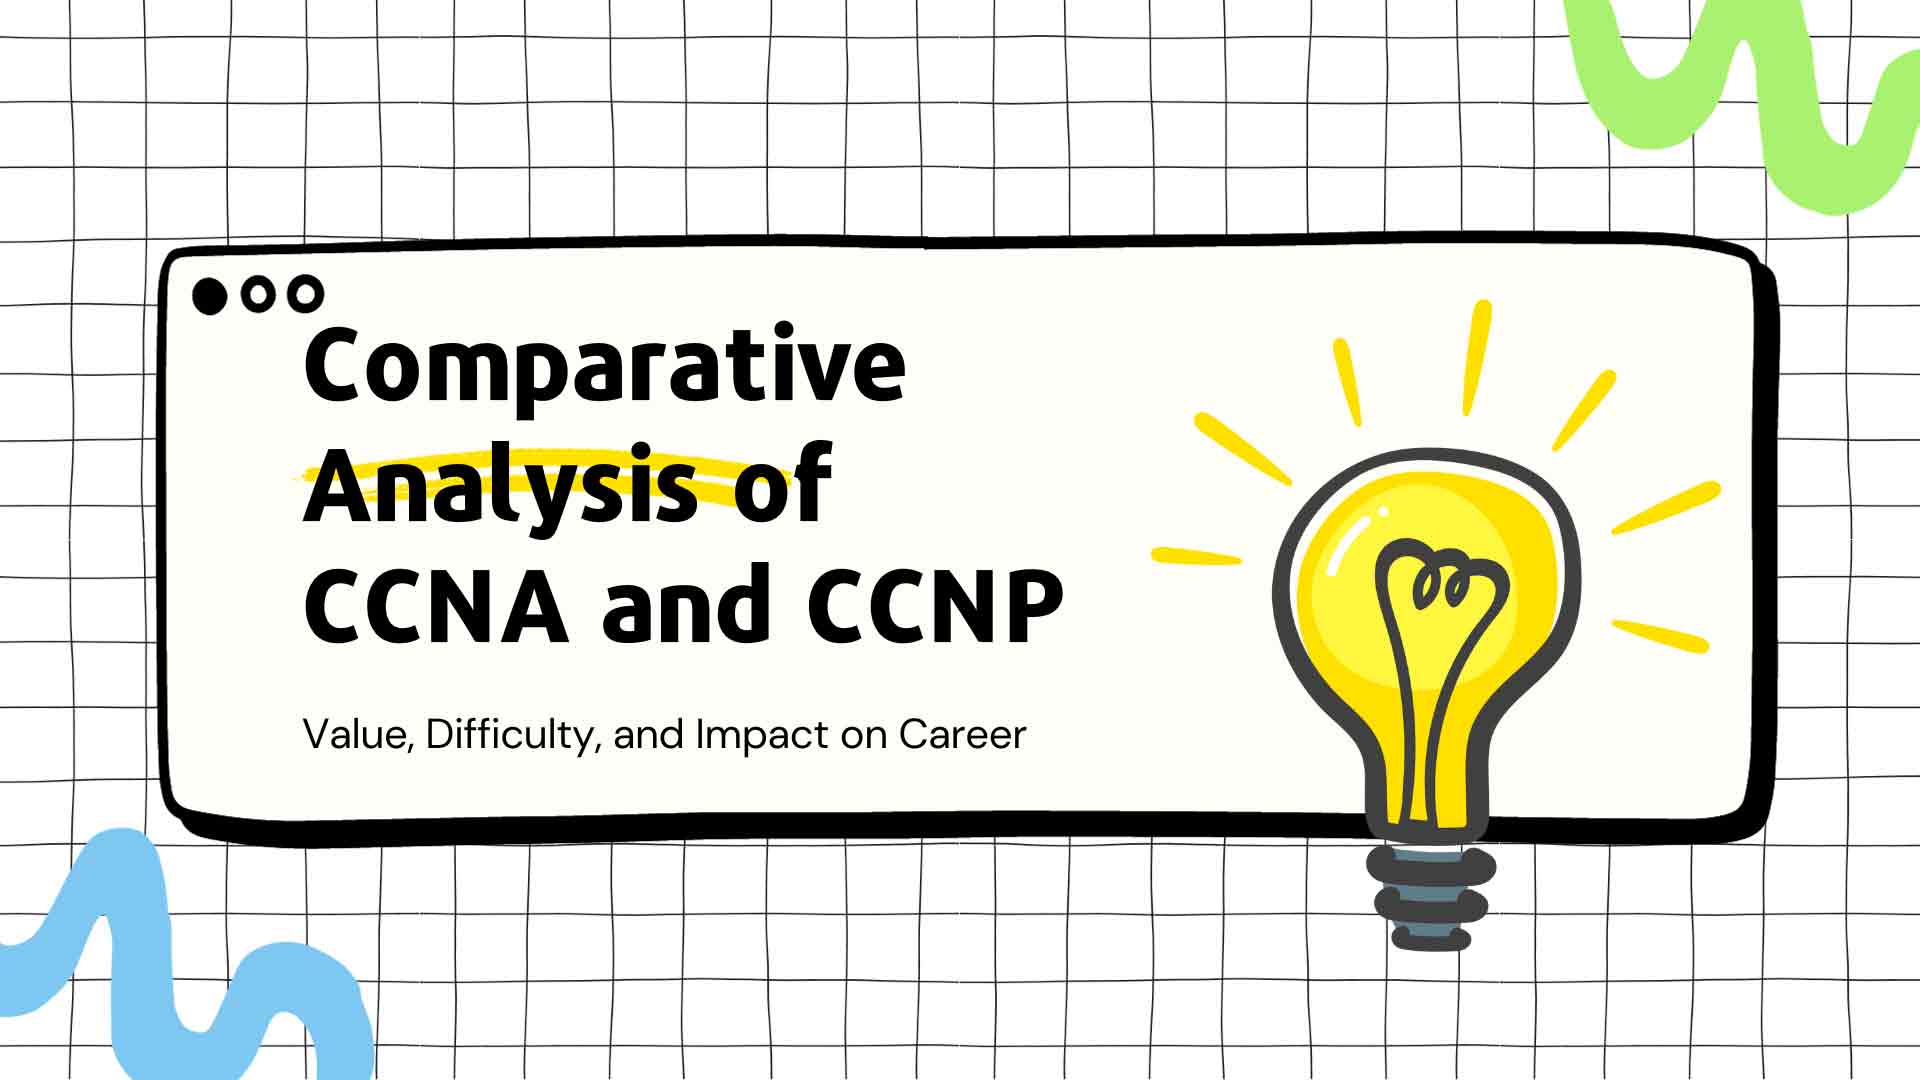 Comparative Analysis of CCNA and CCNP: Value, Difficulty, and Impact on Career